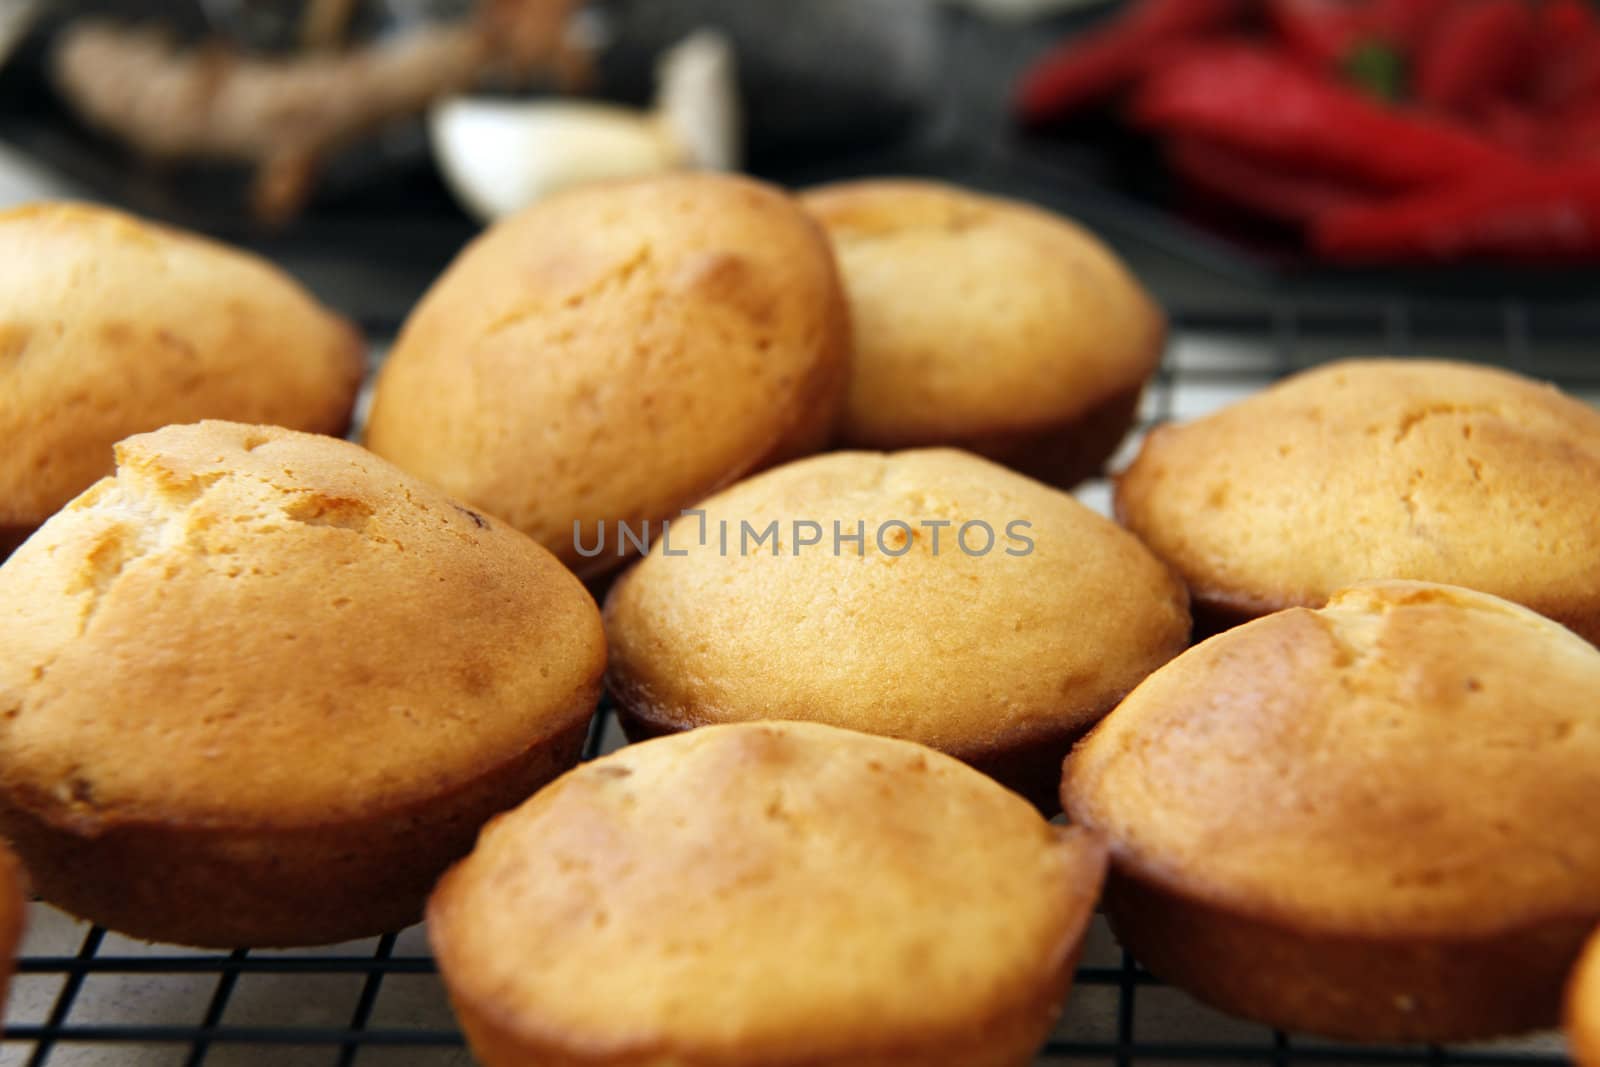 Muffins on a cooling tray by monkeystock